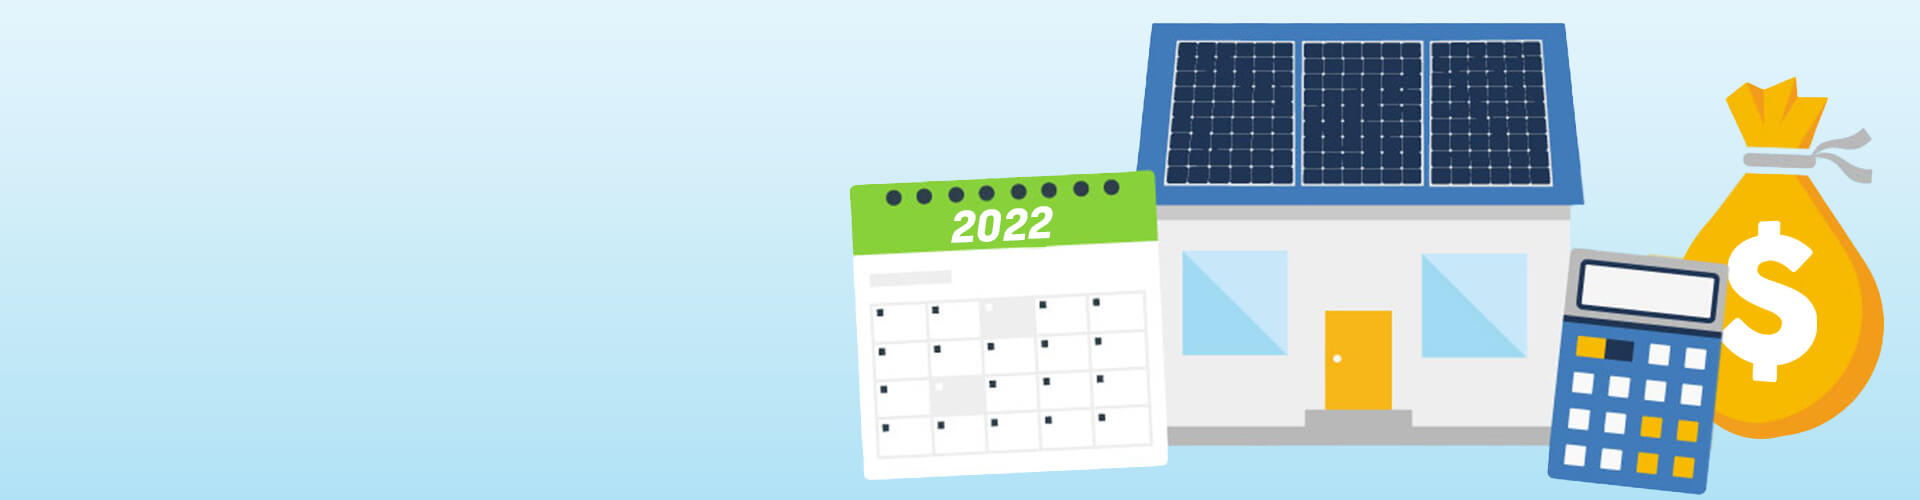 Power prices soaring high – Go solar for a better future – Check rebates and eligibility.